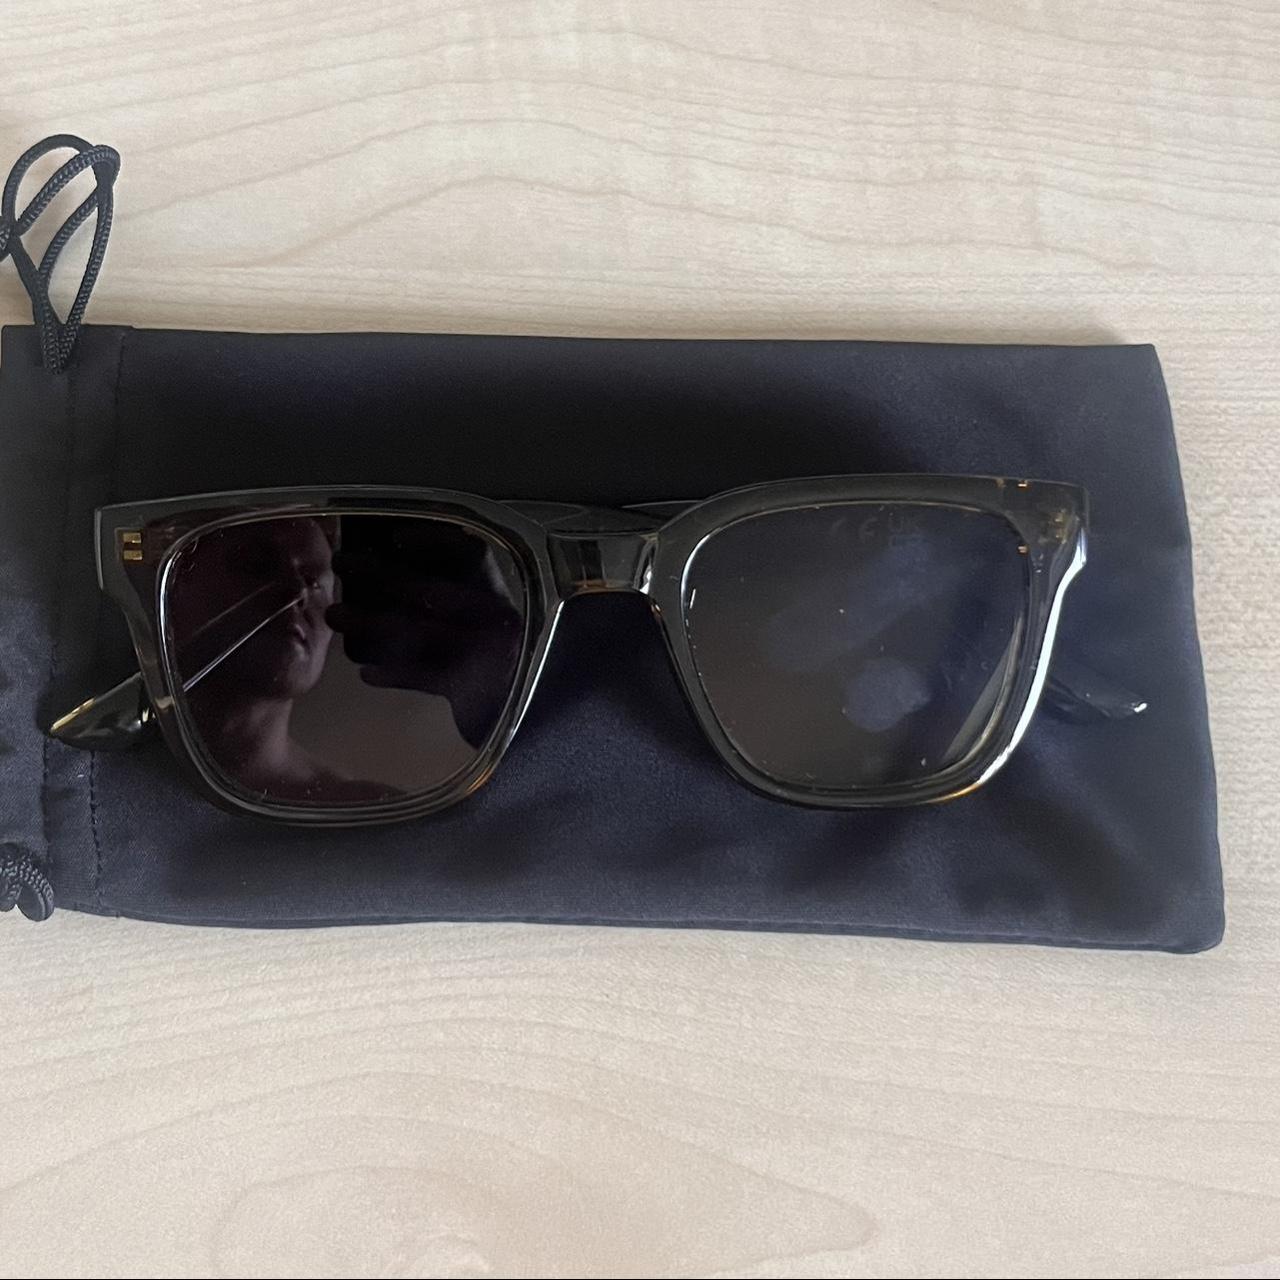 H&M men’s glasses Never used Open to offers - Depop